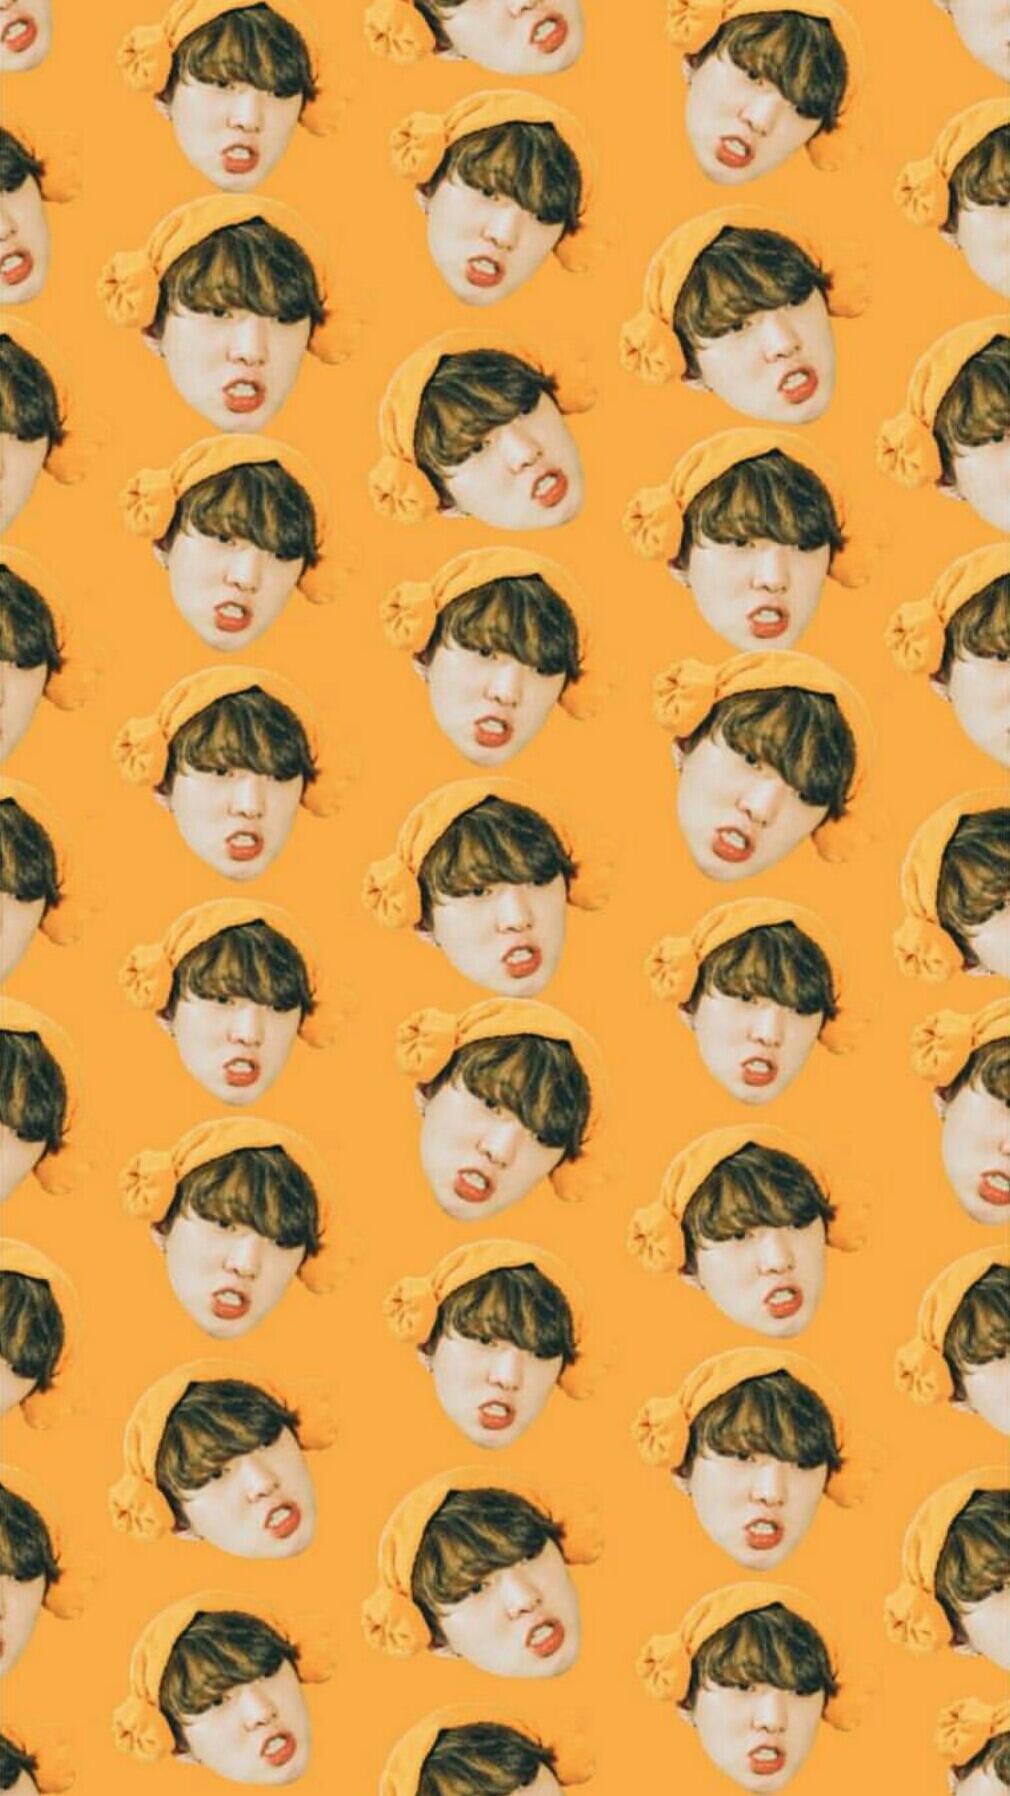 What's Your Current Favorite Kpop Wallpaper?